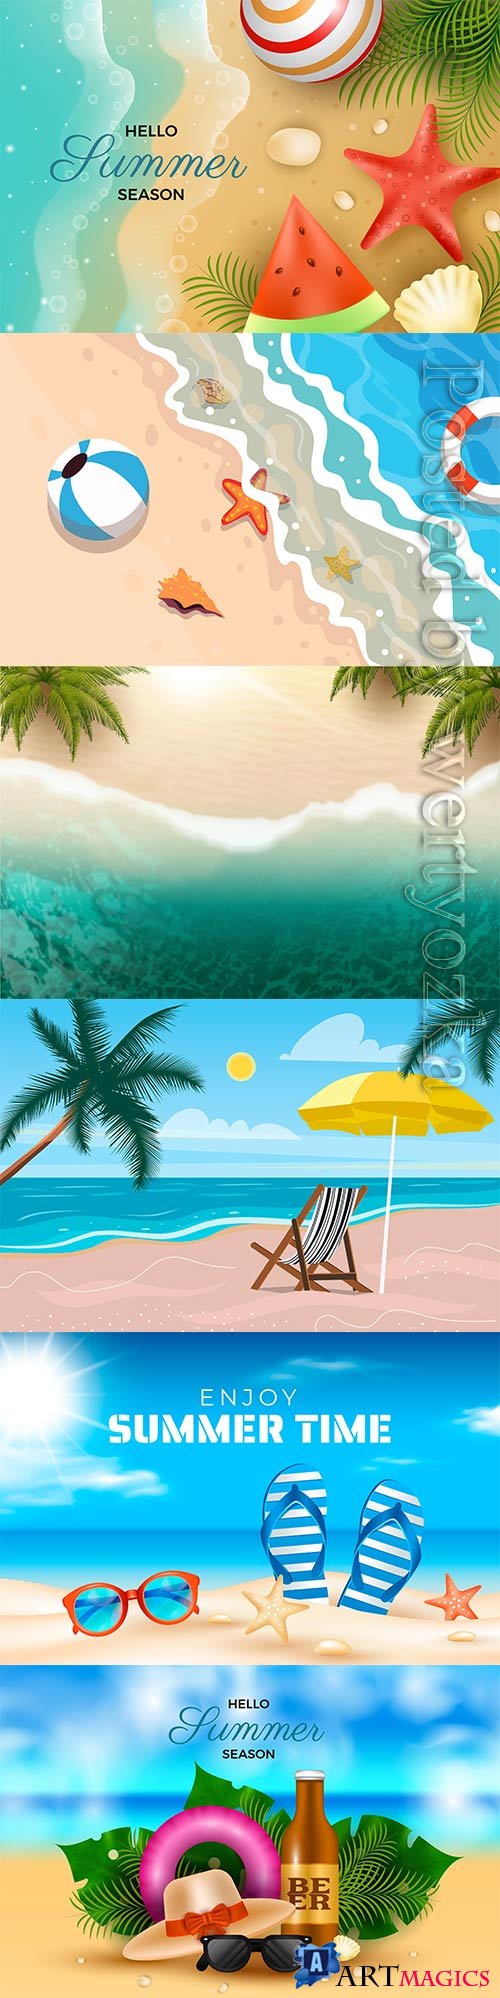 Realistic summer vector background